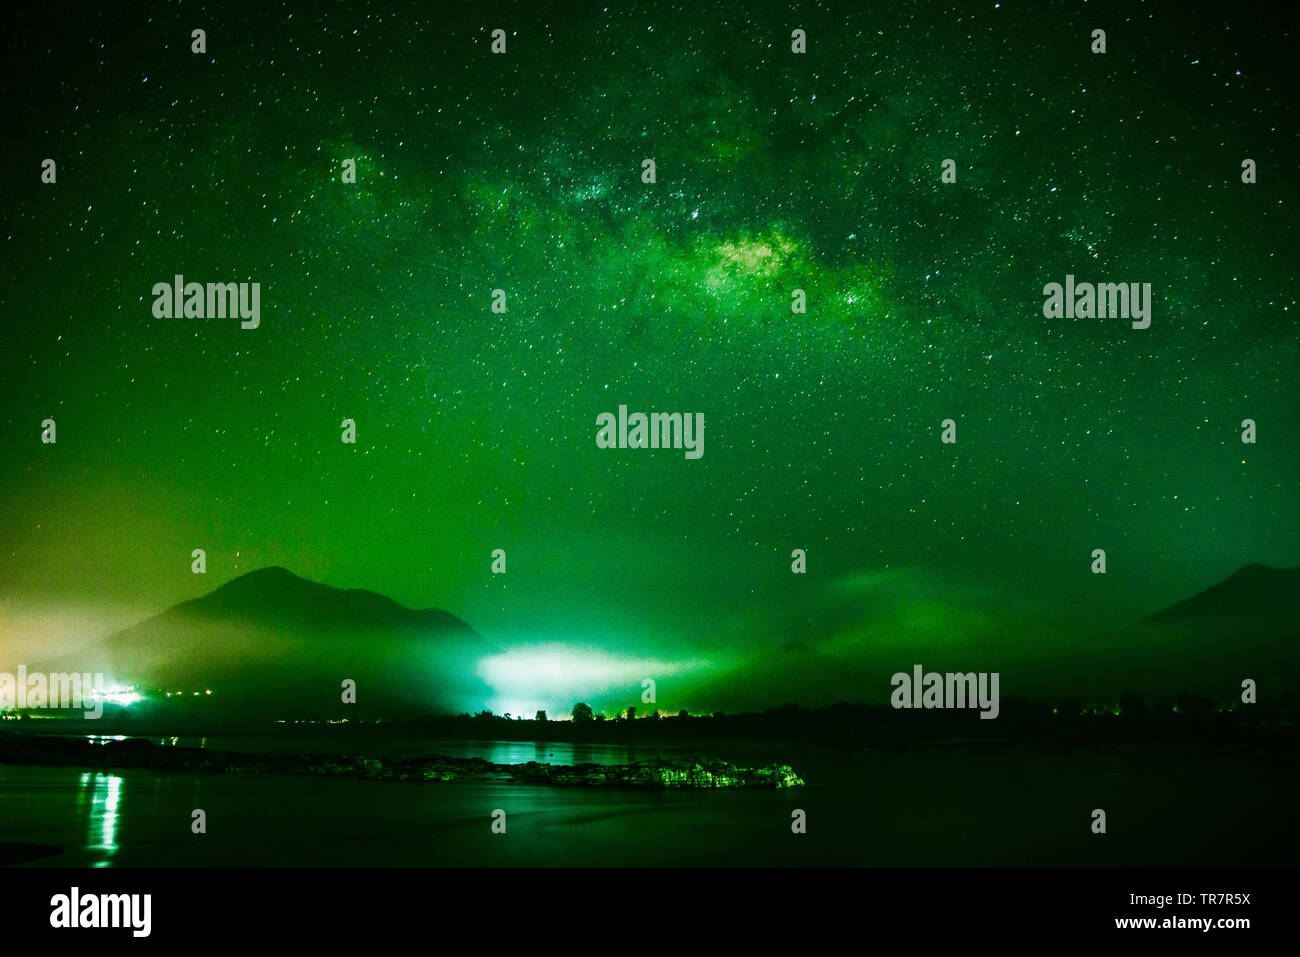 Milky Way Galaxy Landscape Rivers On Green Color And Light With Mountains Background On The Dark Sky Night In Thailand Stock Photo Alamy